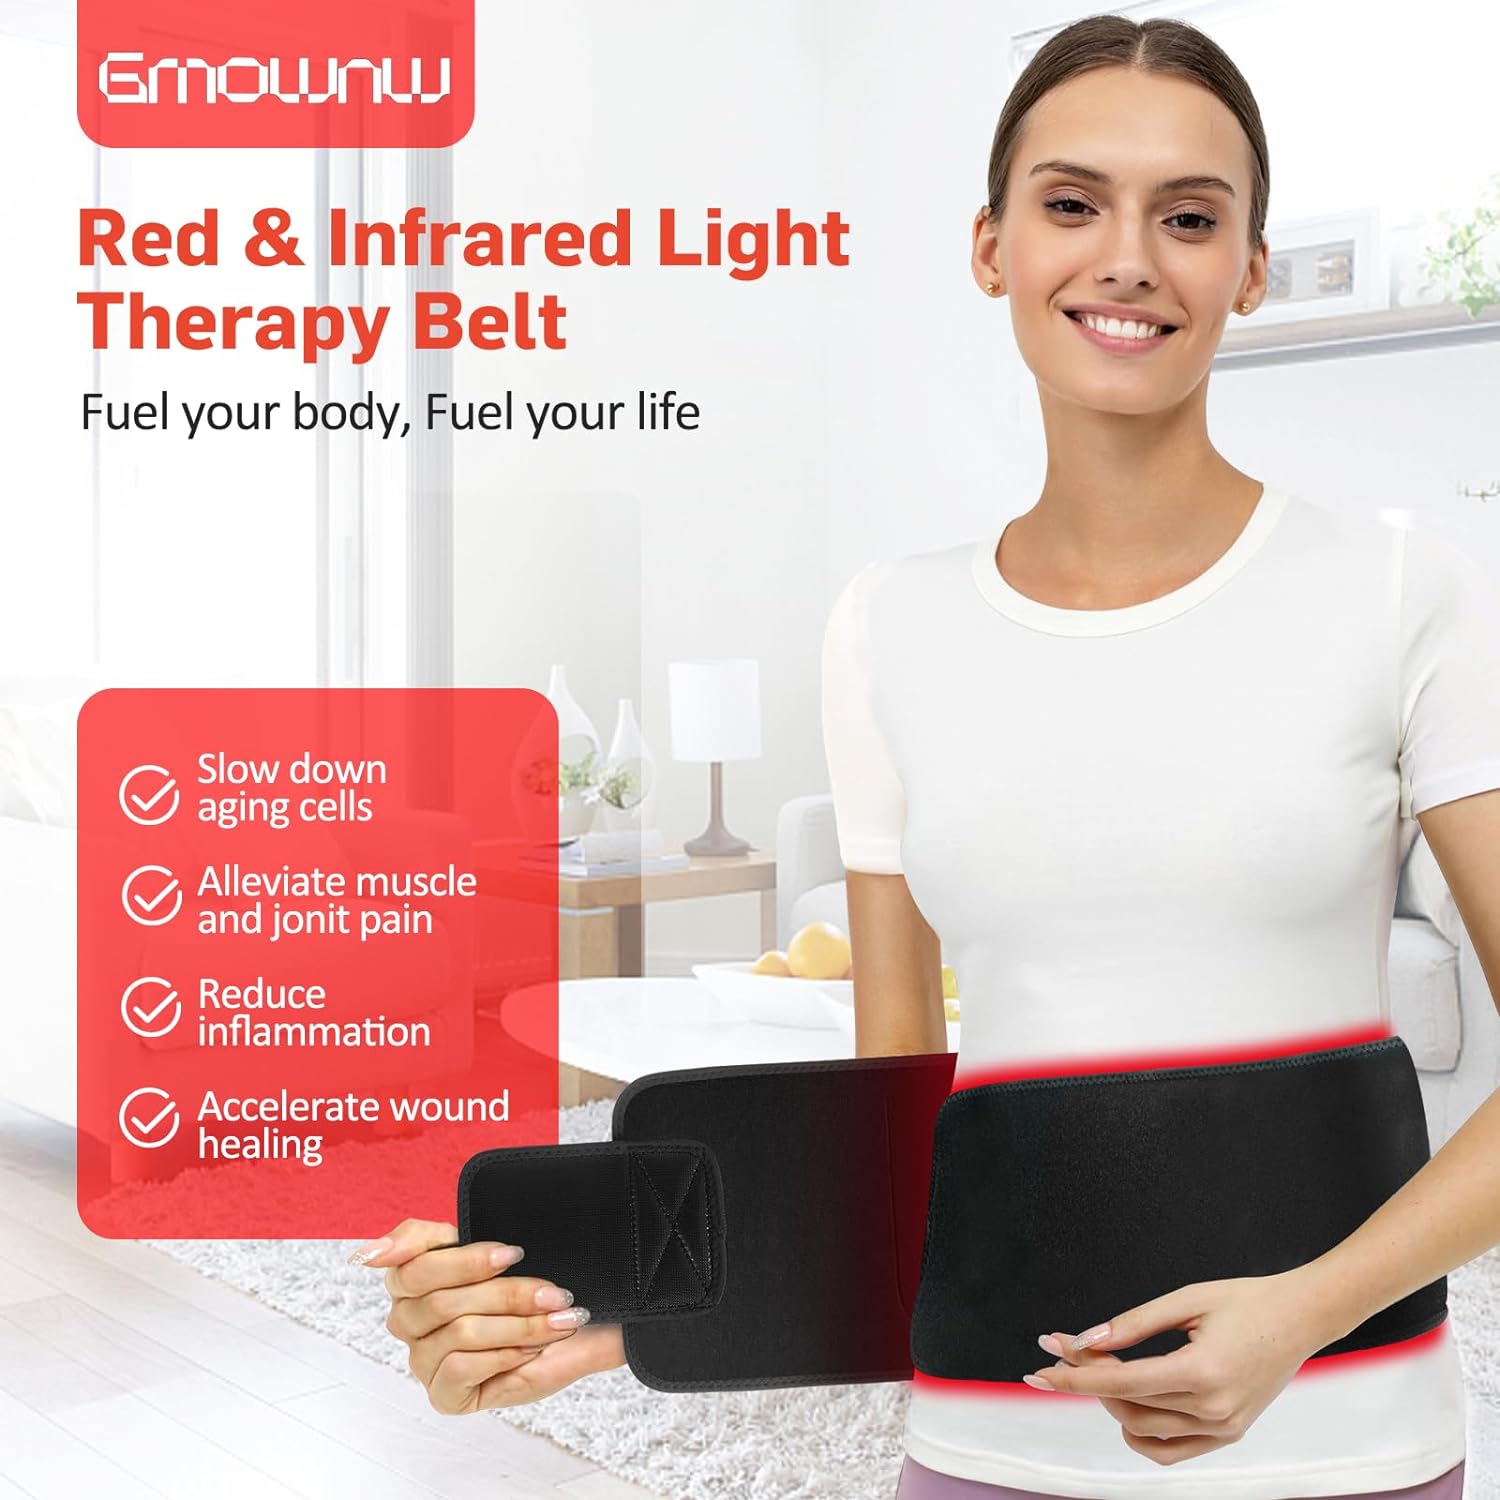 Red Light Therapy for Body, Infrared Light Therapy for Shoulder Waist Muscle Pain Relief, Upgraded 3 in 1 Led Beads, 660nm850nm Near Infrared Light Therapy Belt Wrap Timer Remote Control